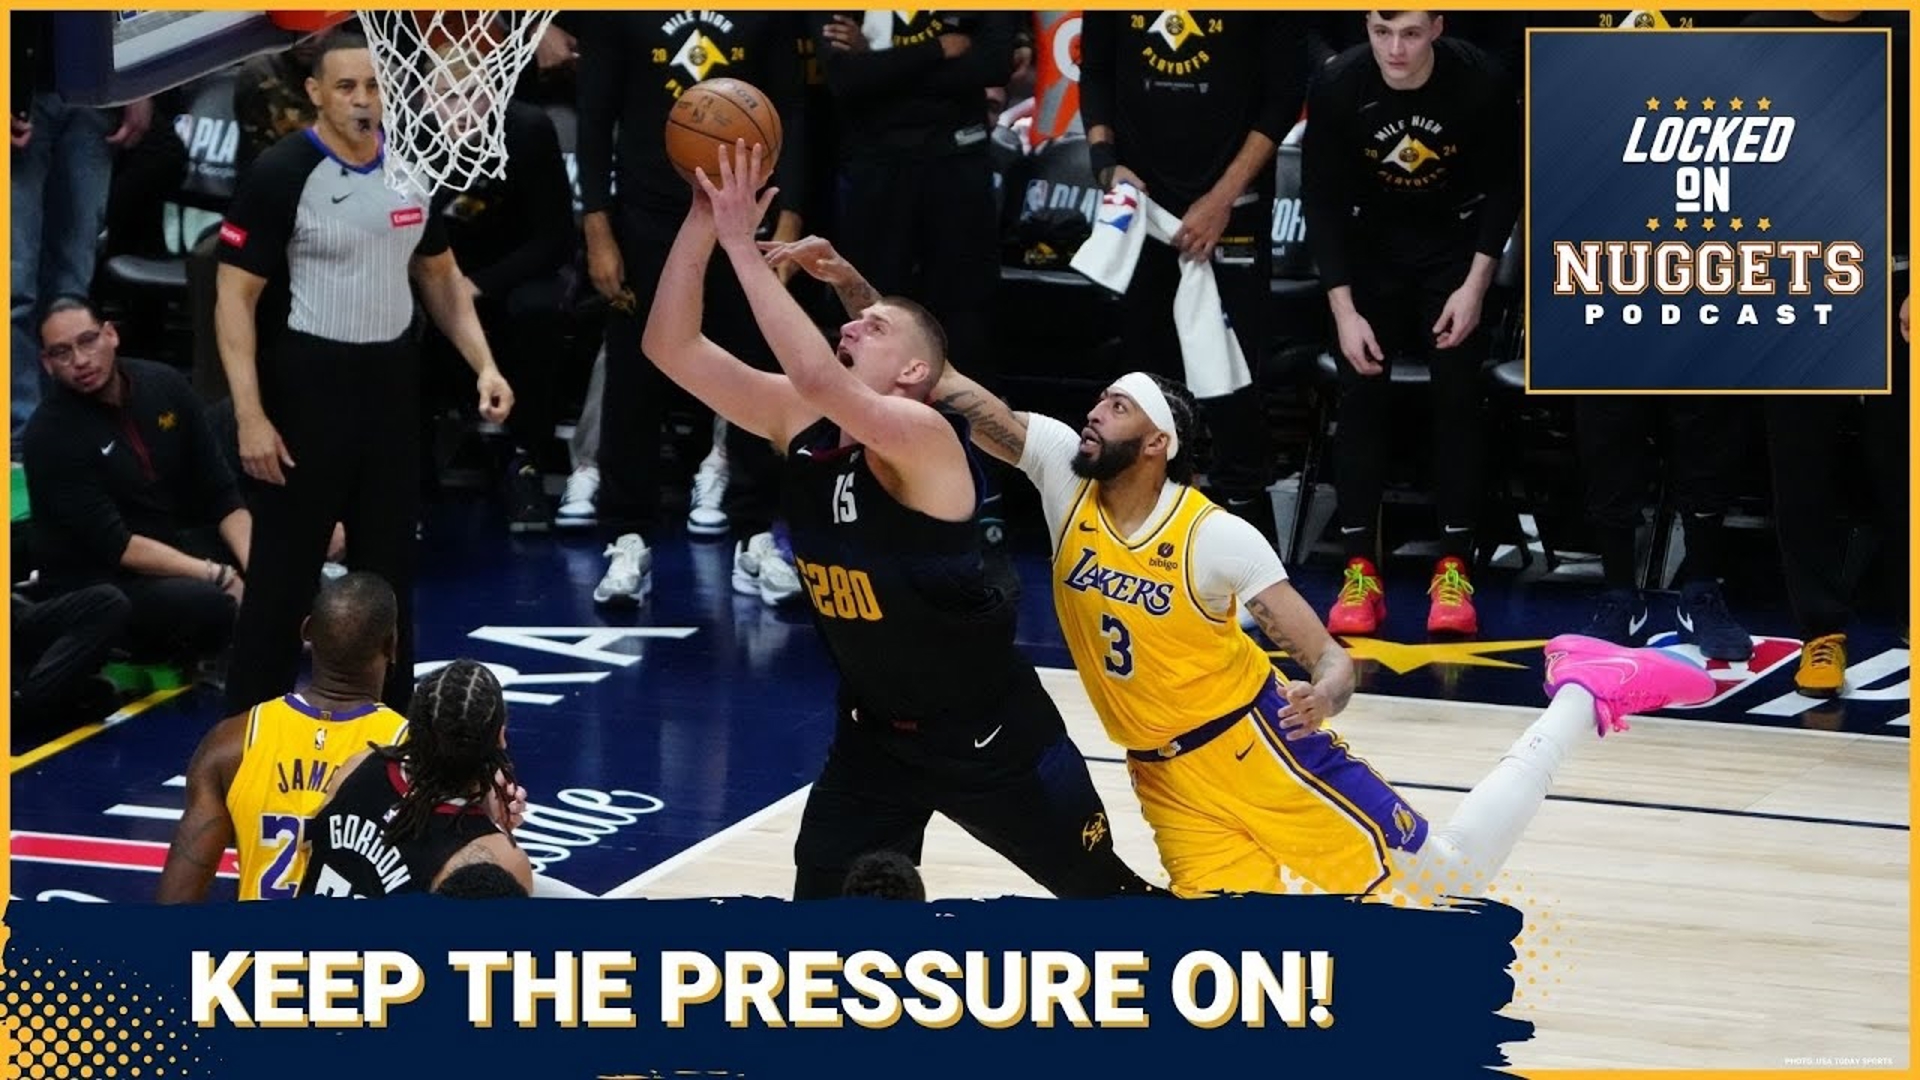 WORLD'S FINEST! The Nuggets are still basking in the glow of Monday's incredible Game 2 win. Adam Mares shares his biggest reaction as the dust settles.